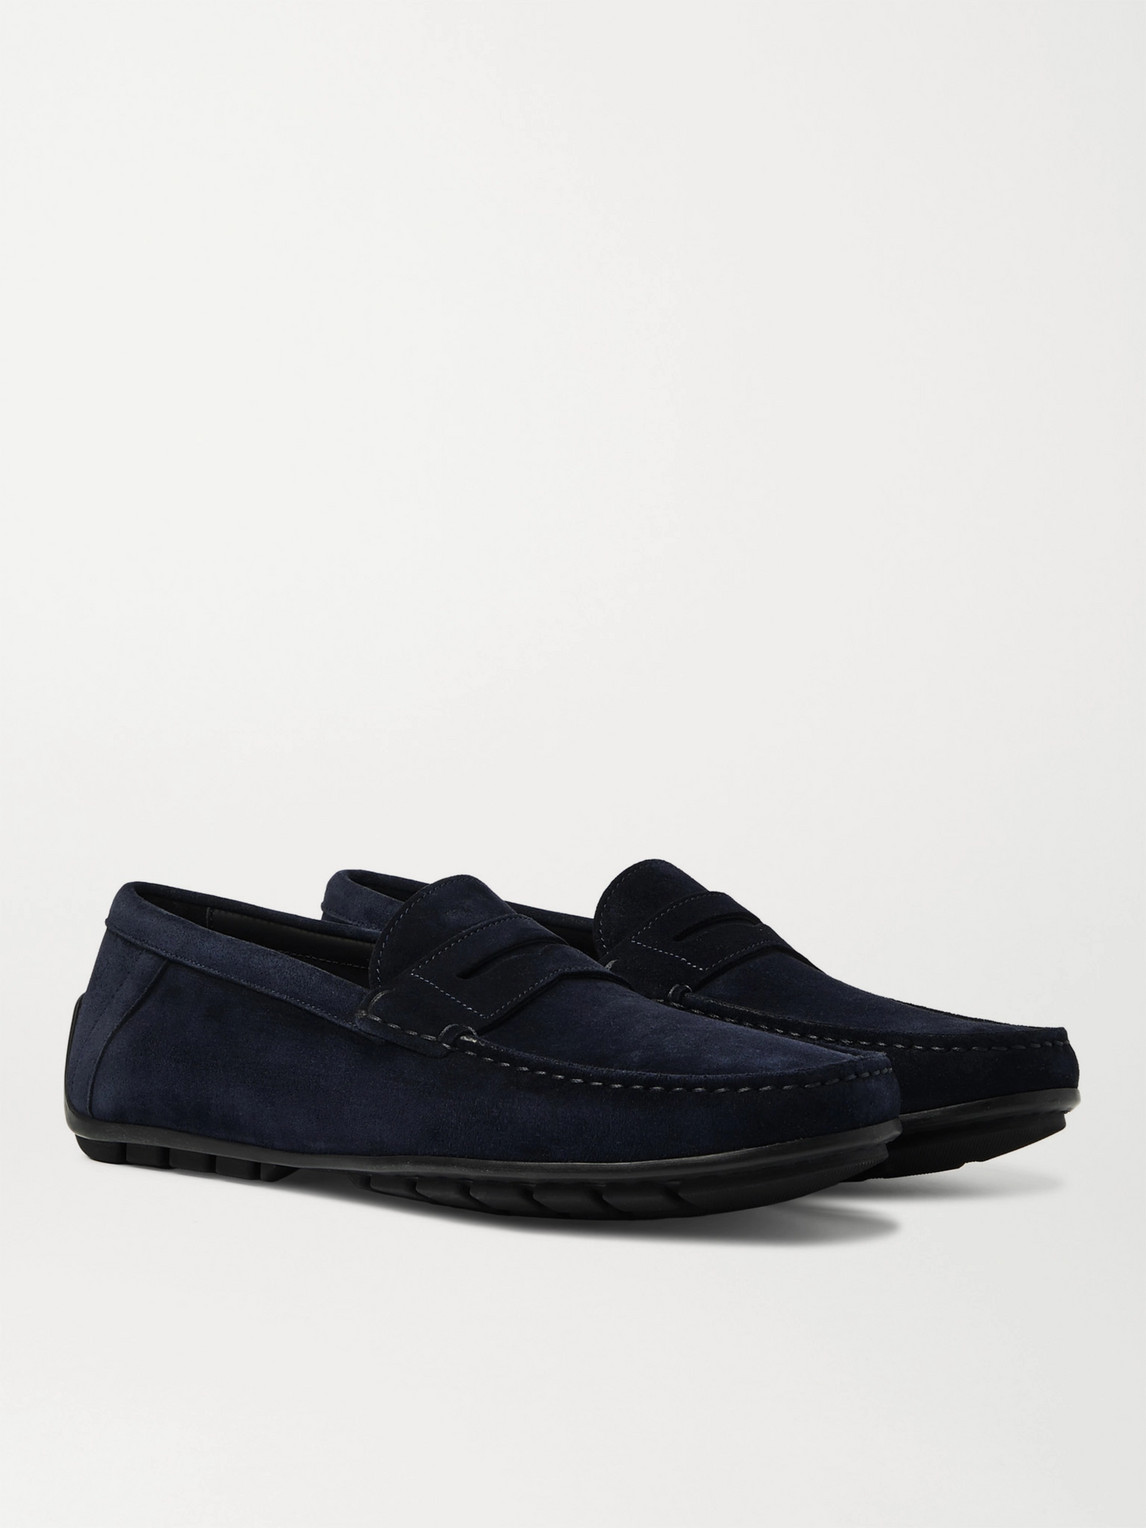 suede driving shoes